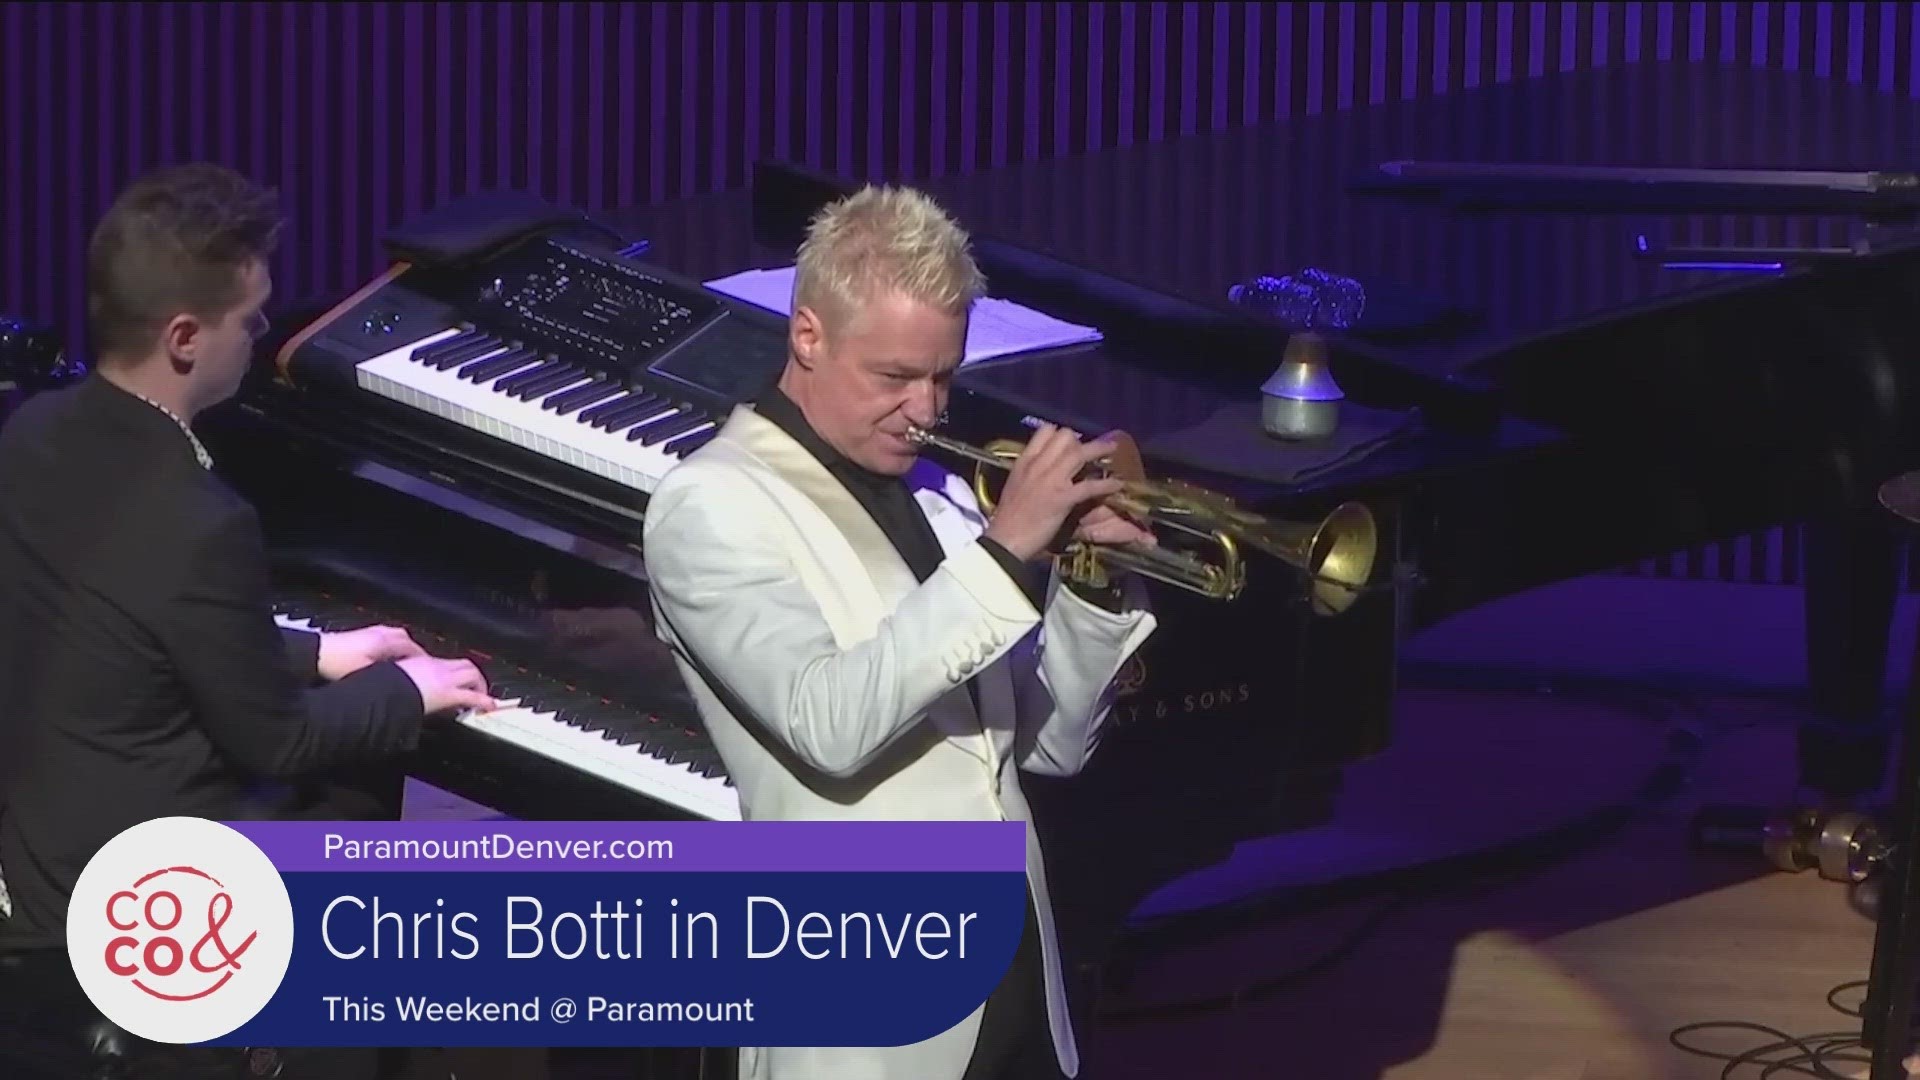 Get your tickets to see Chris Botti at the Paramount. He's only here for one night! Visit ParamountDenver.com to get your tickets.